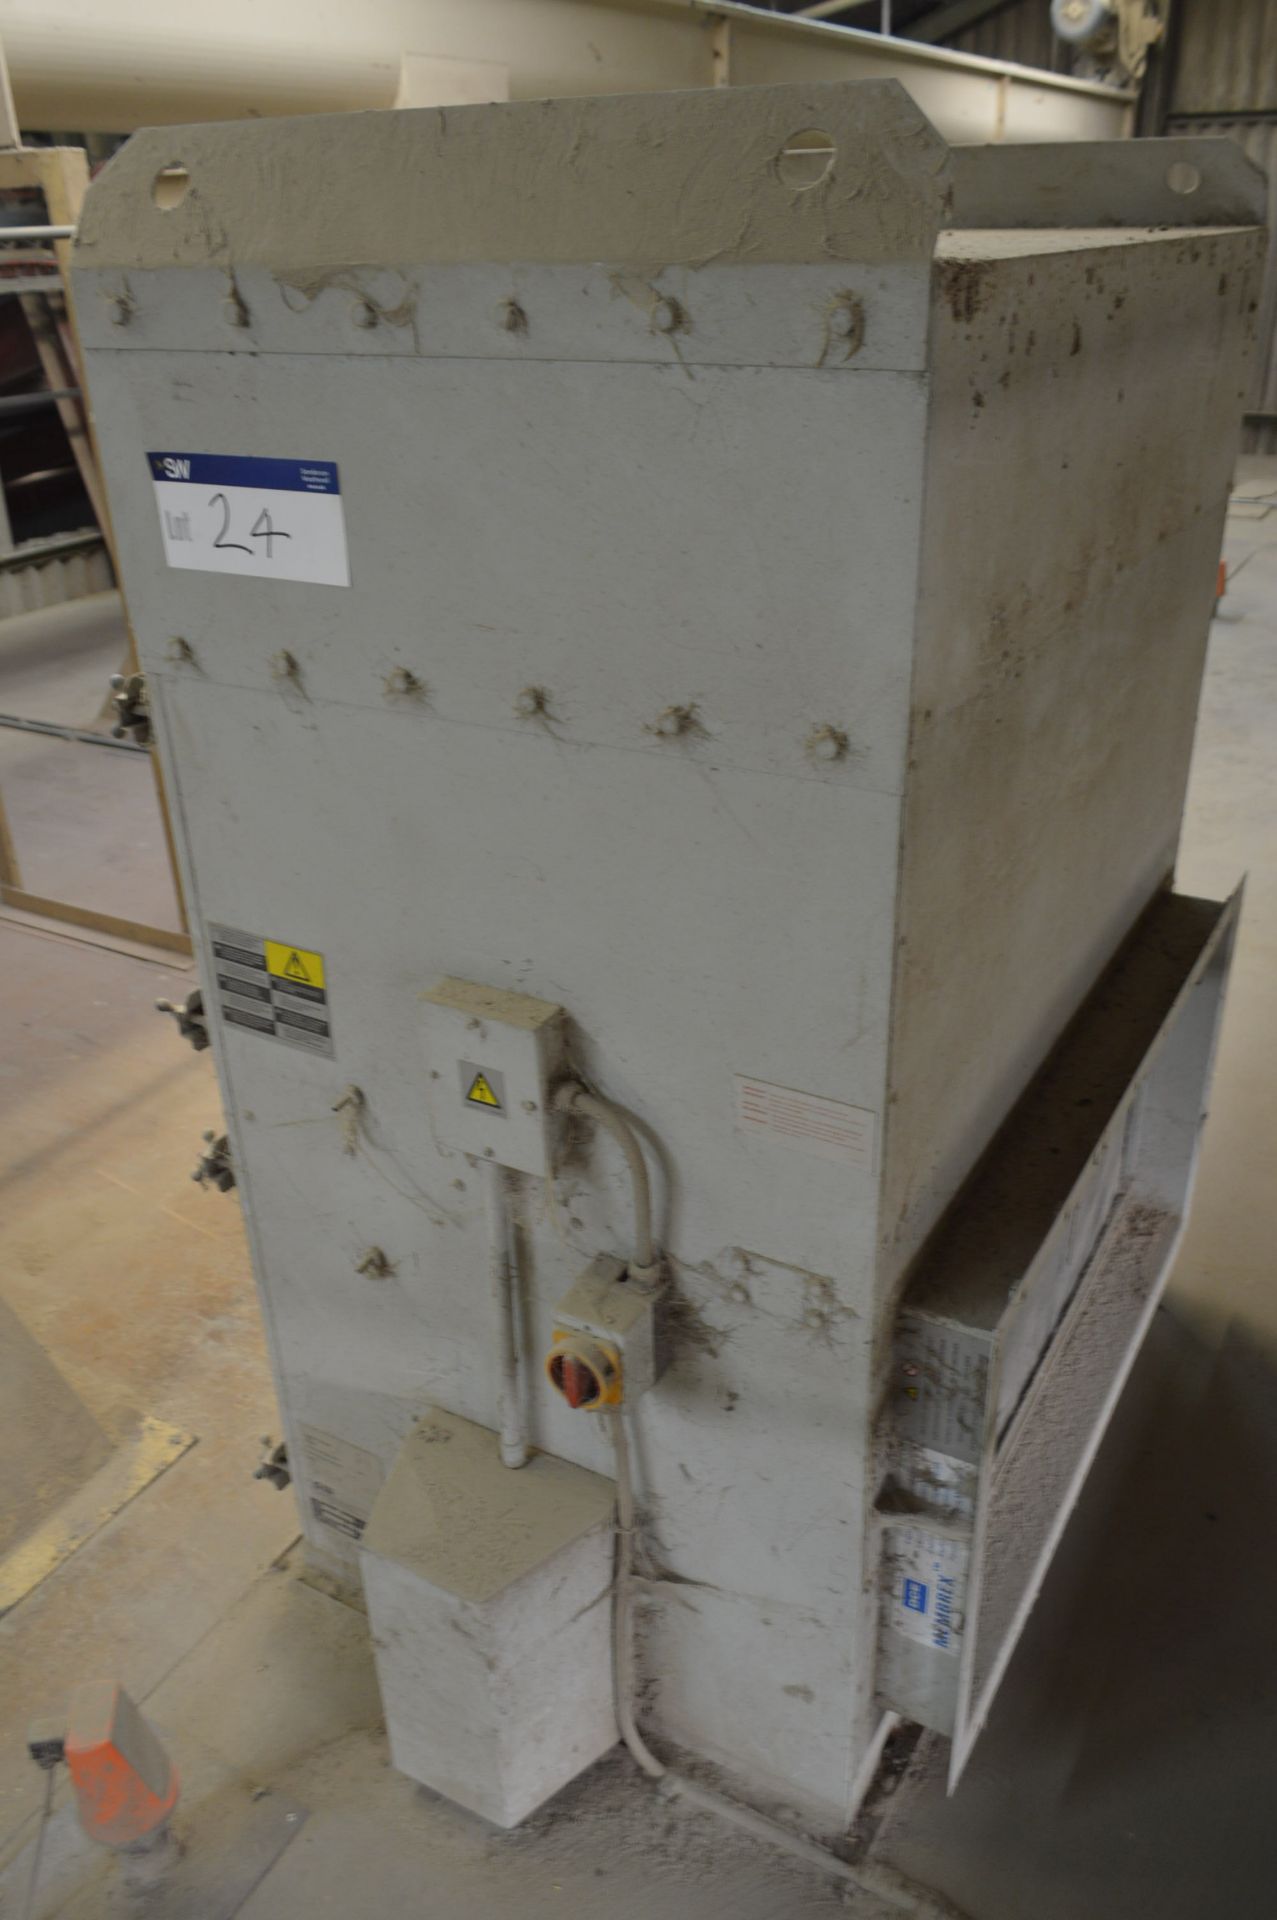 DCE Unimaster 250HK3 Dust Venting Unit, serial no. 675073, year of manufacture 2000 - Image 3 of 4